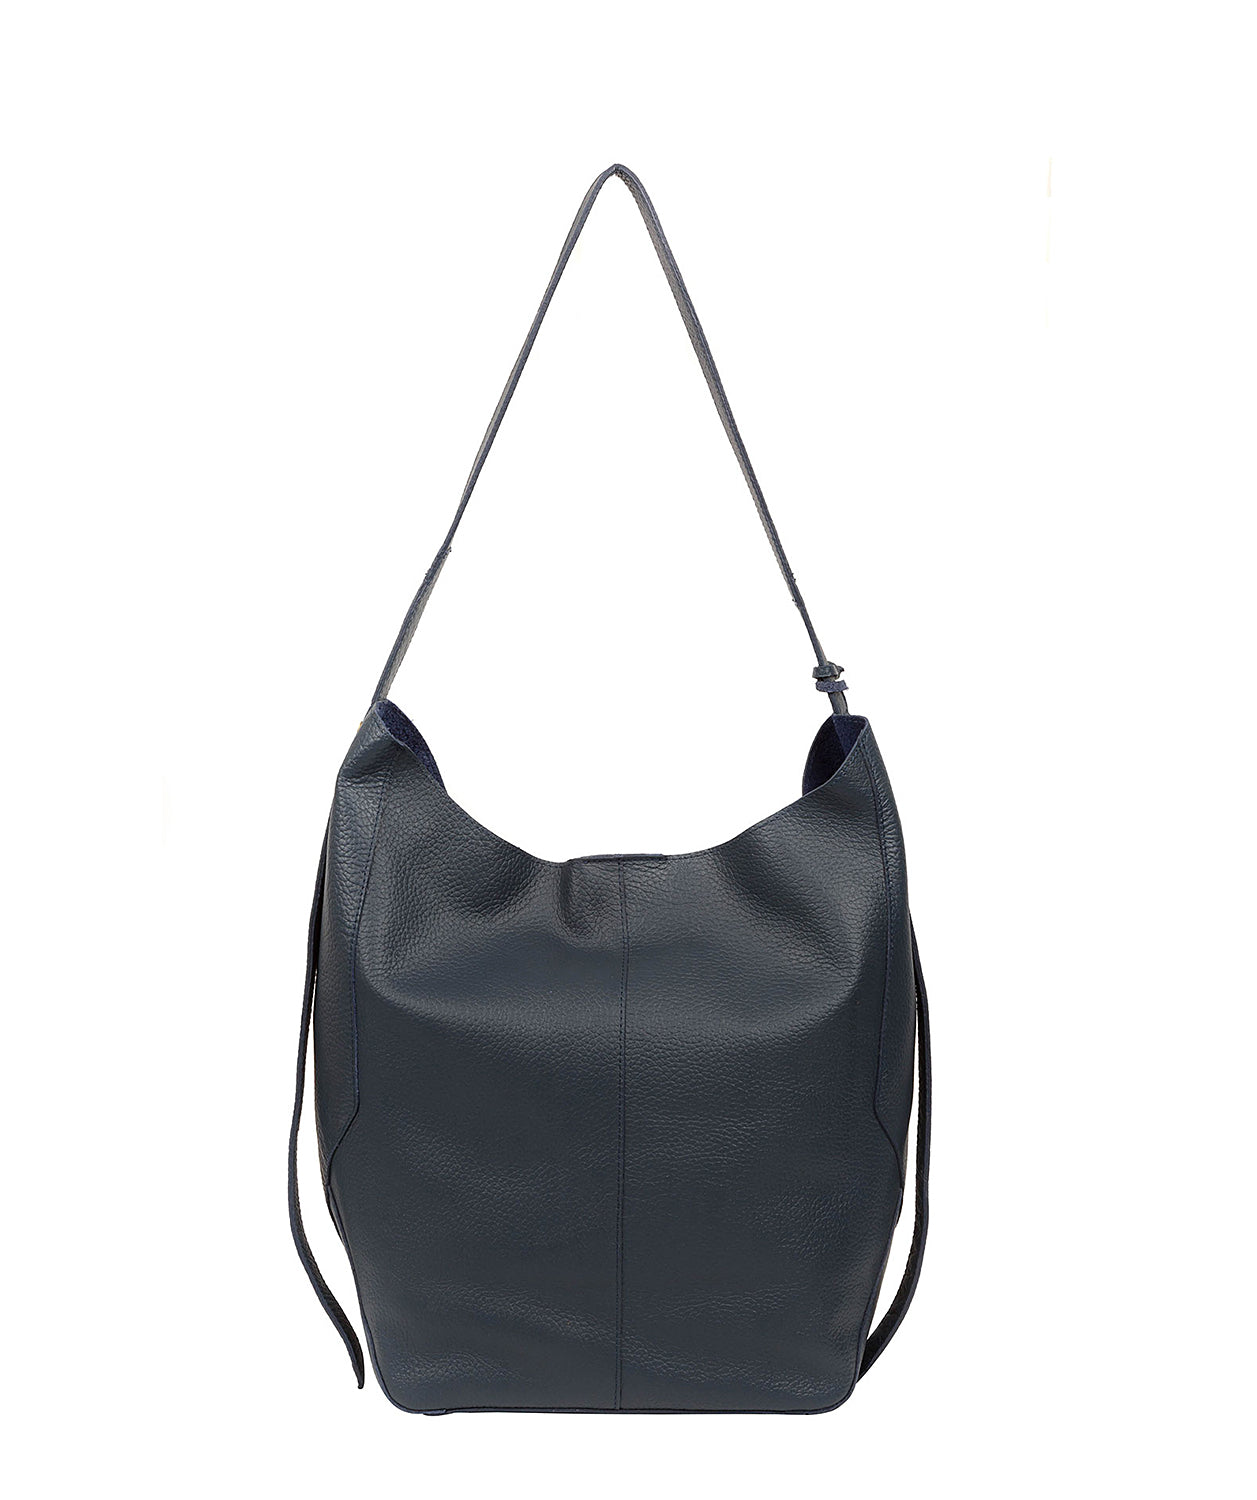 Blue Leather Shoulder Bag 'Hoxton' by Pure Luxuries – Pure Luxuries London